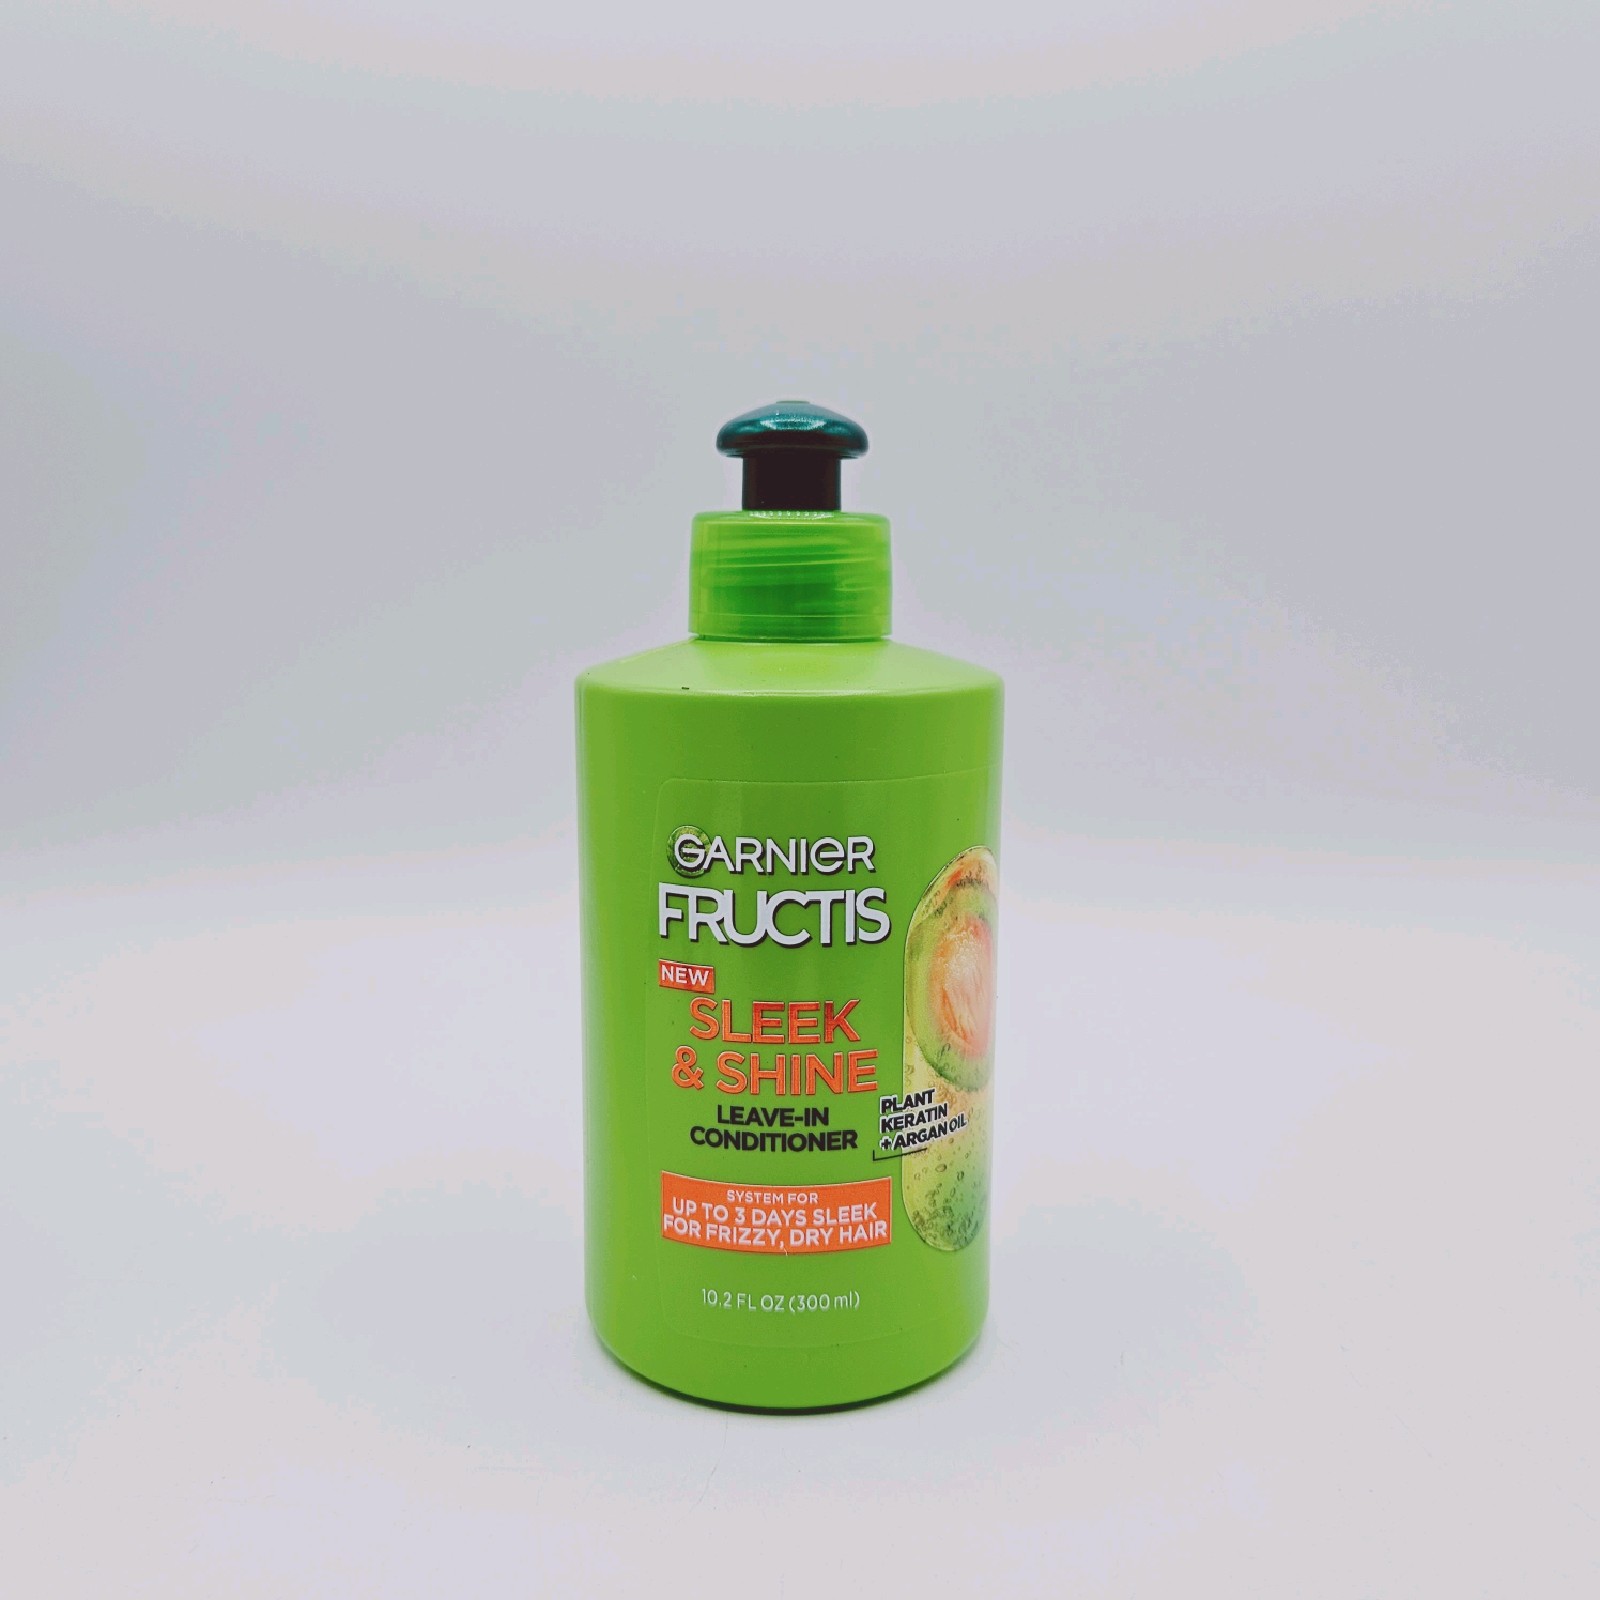 Garnier Fructis Sleek and Shine Leave In Conditioner with Argan Oil 10.2 oz